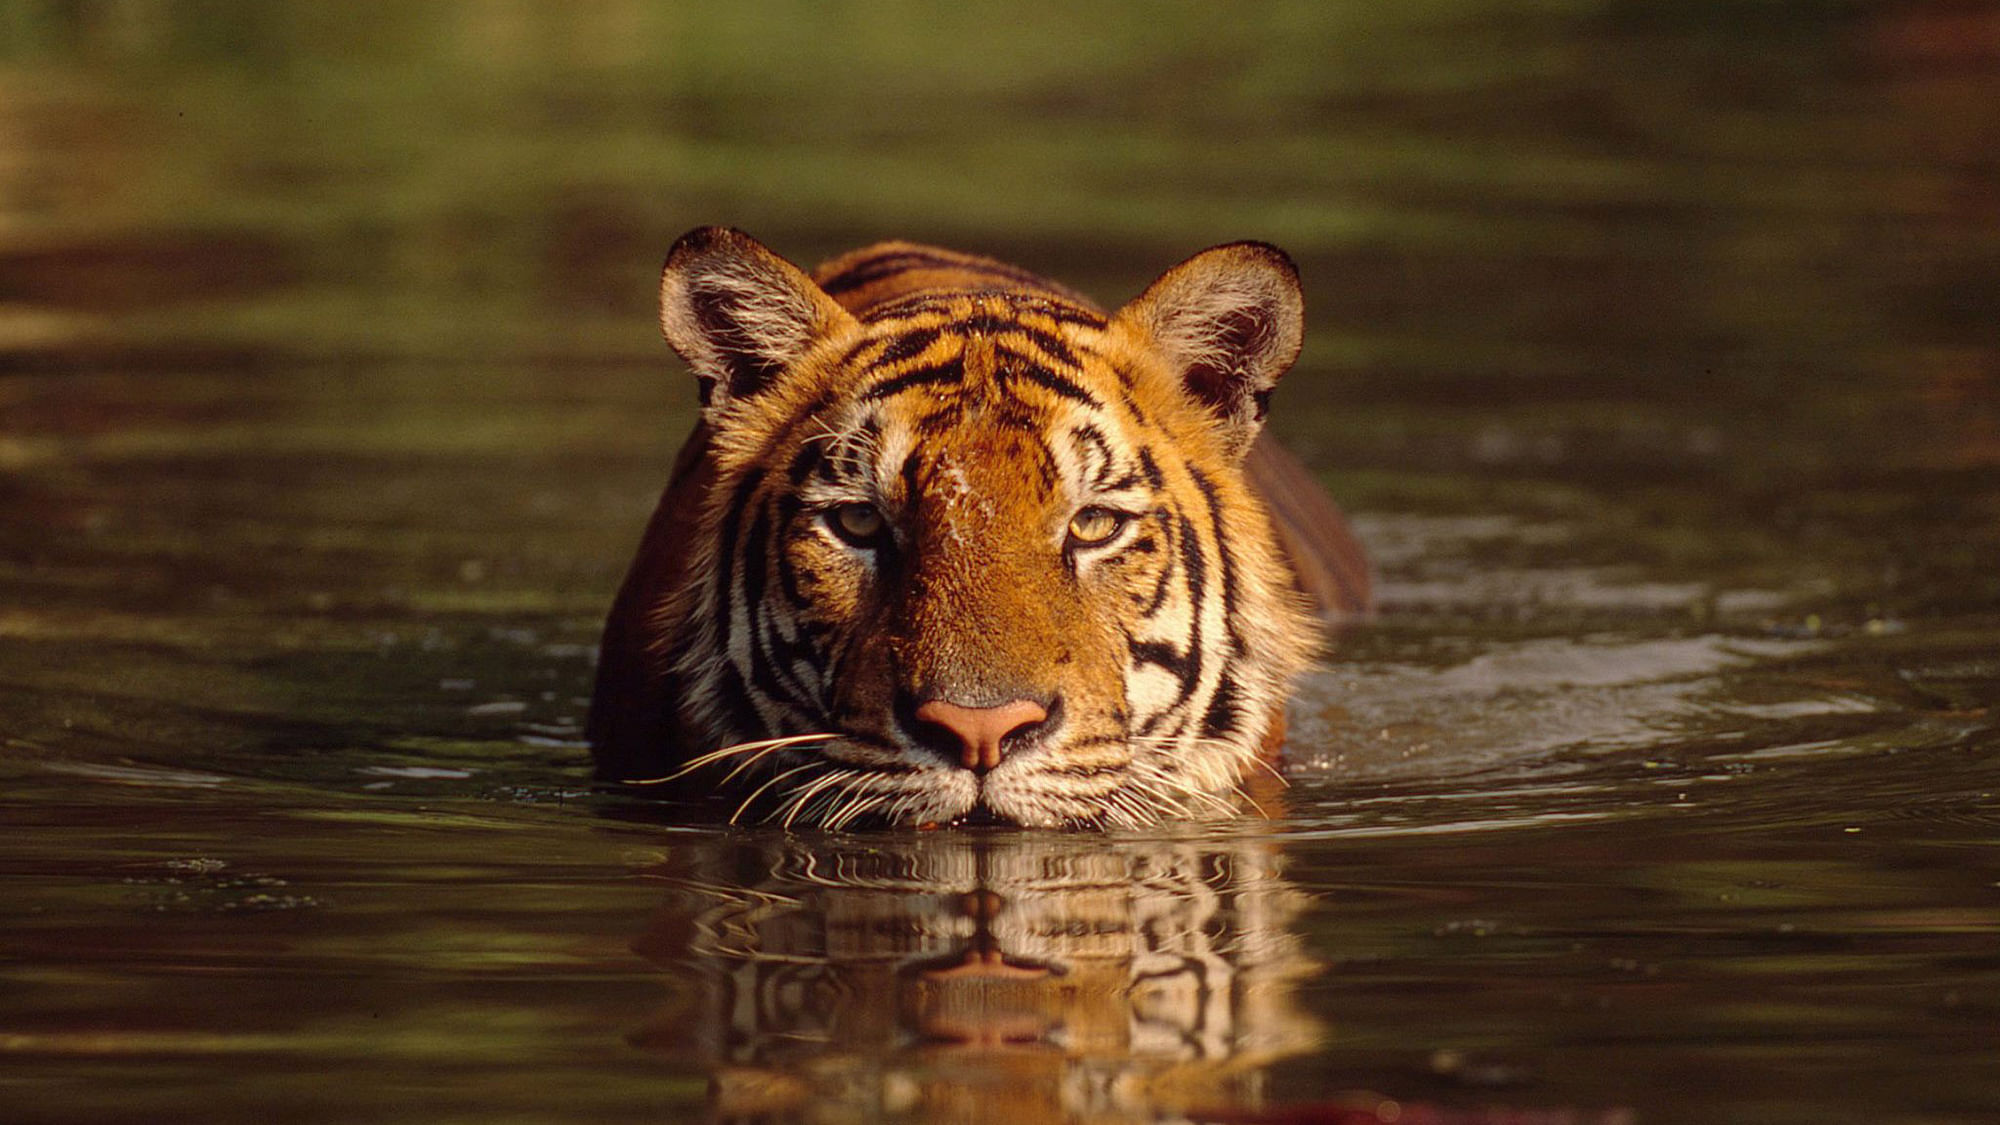 Corbett has the second-largest tiger population in India. Photo for representational purposes. (Photo: iStock)